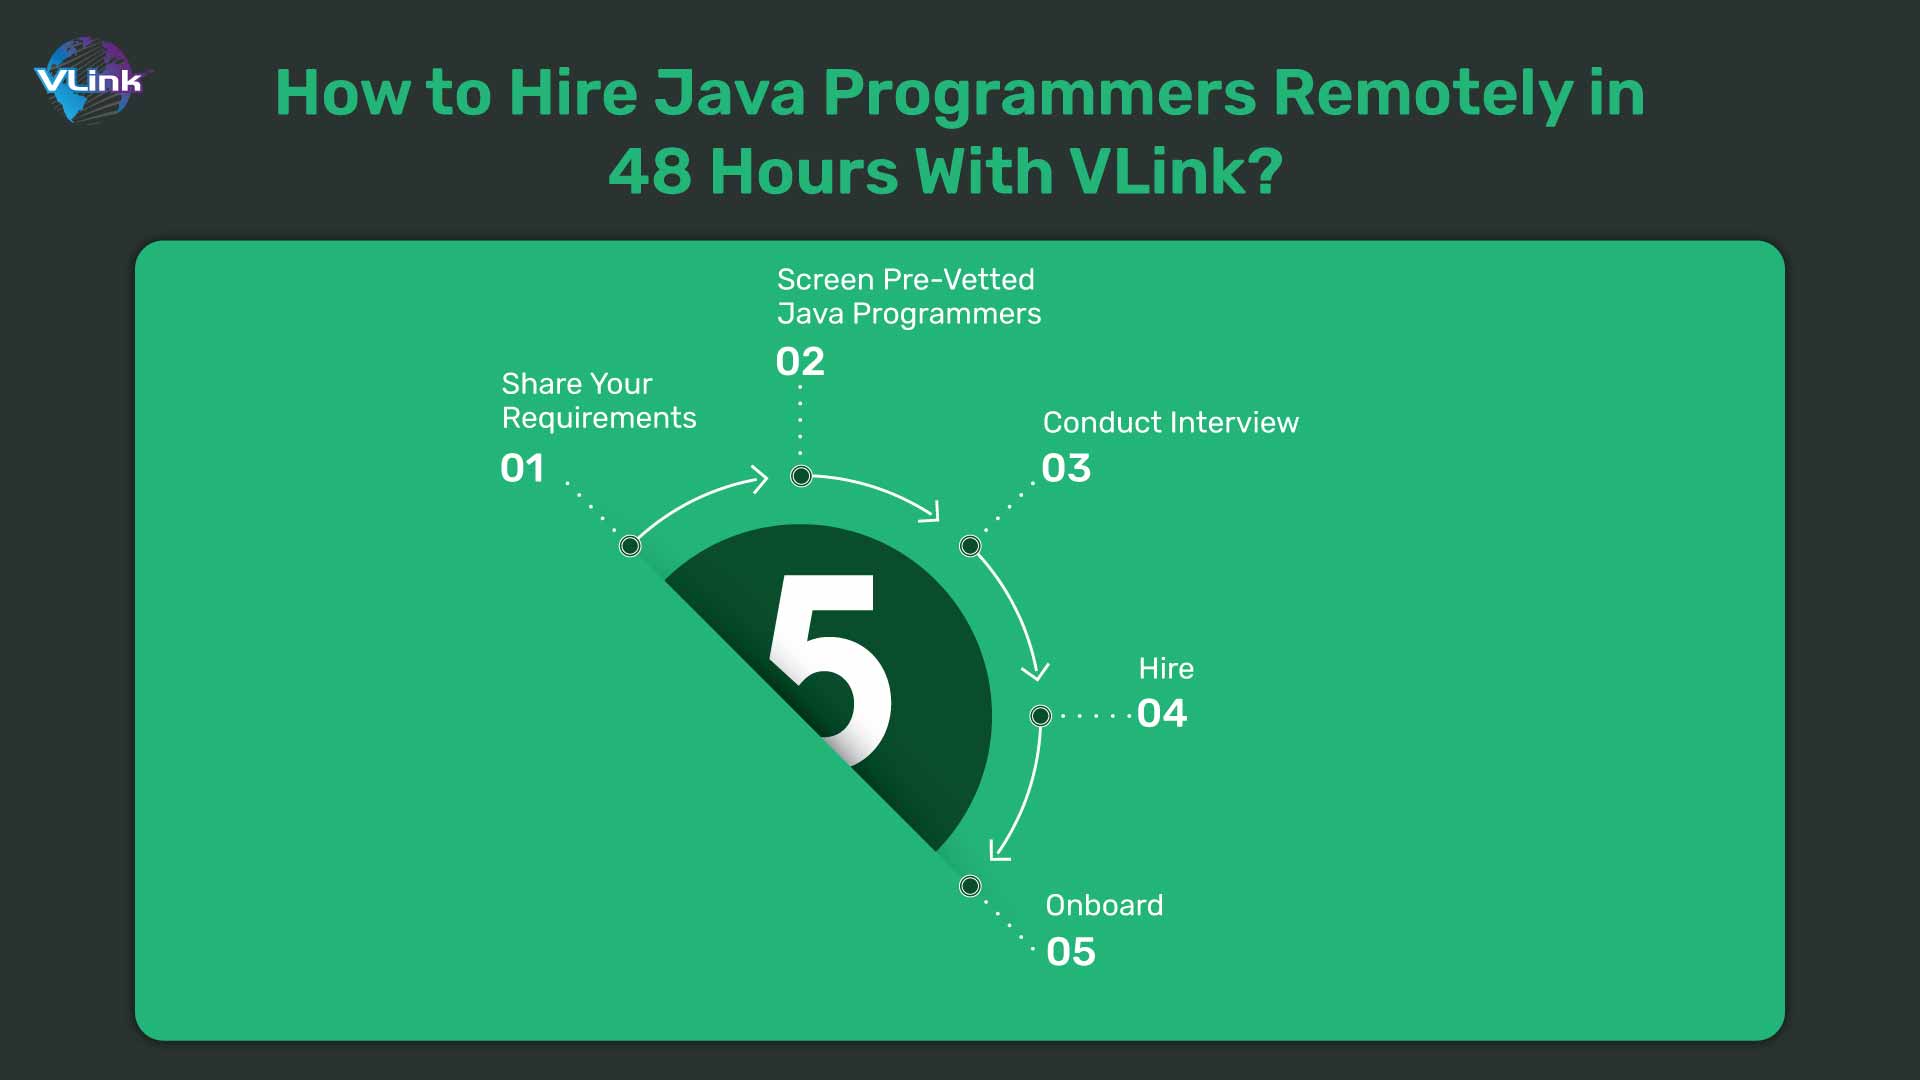 How to Hire Java Programmers Remotely in 48 Hours with VLink